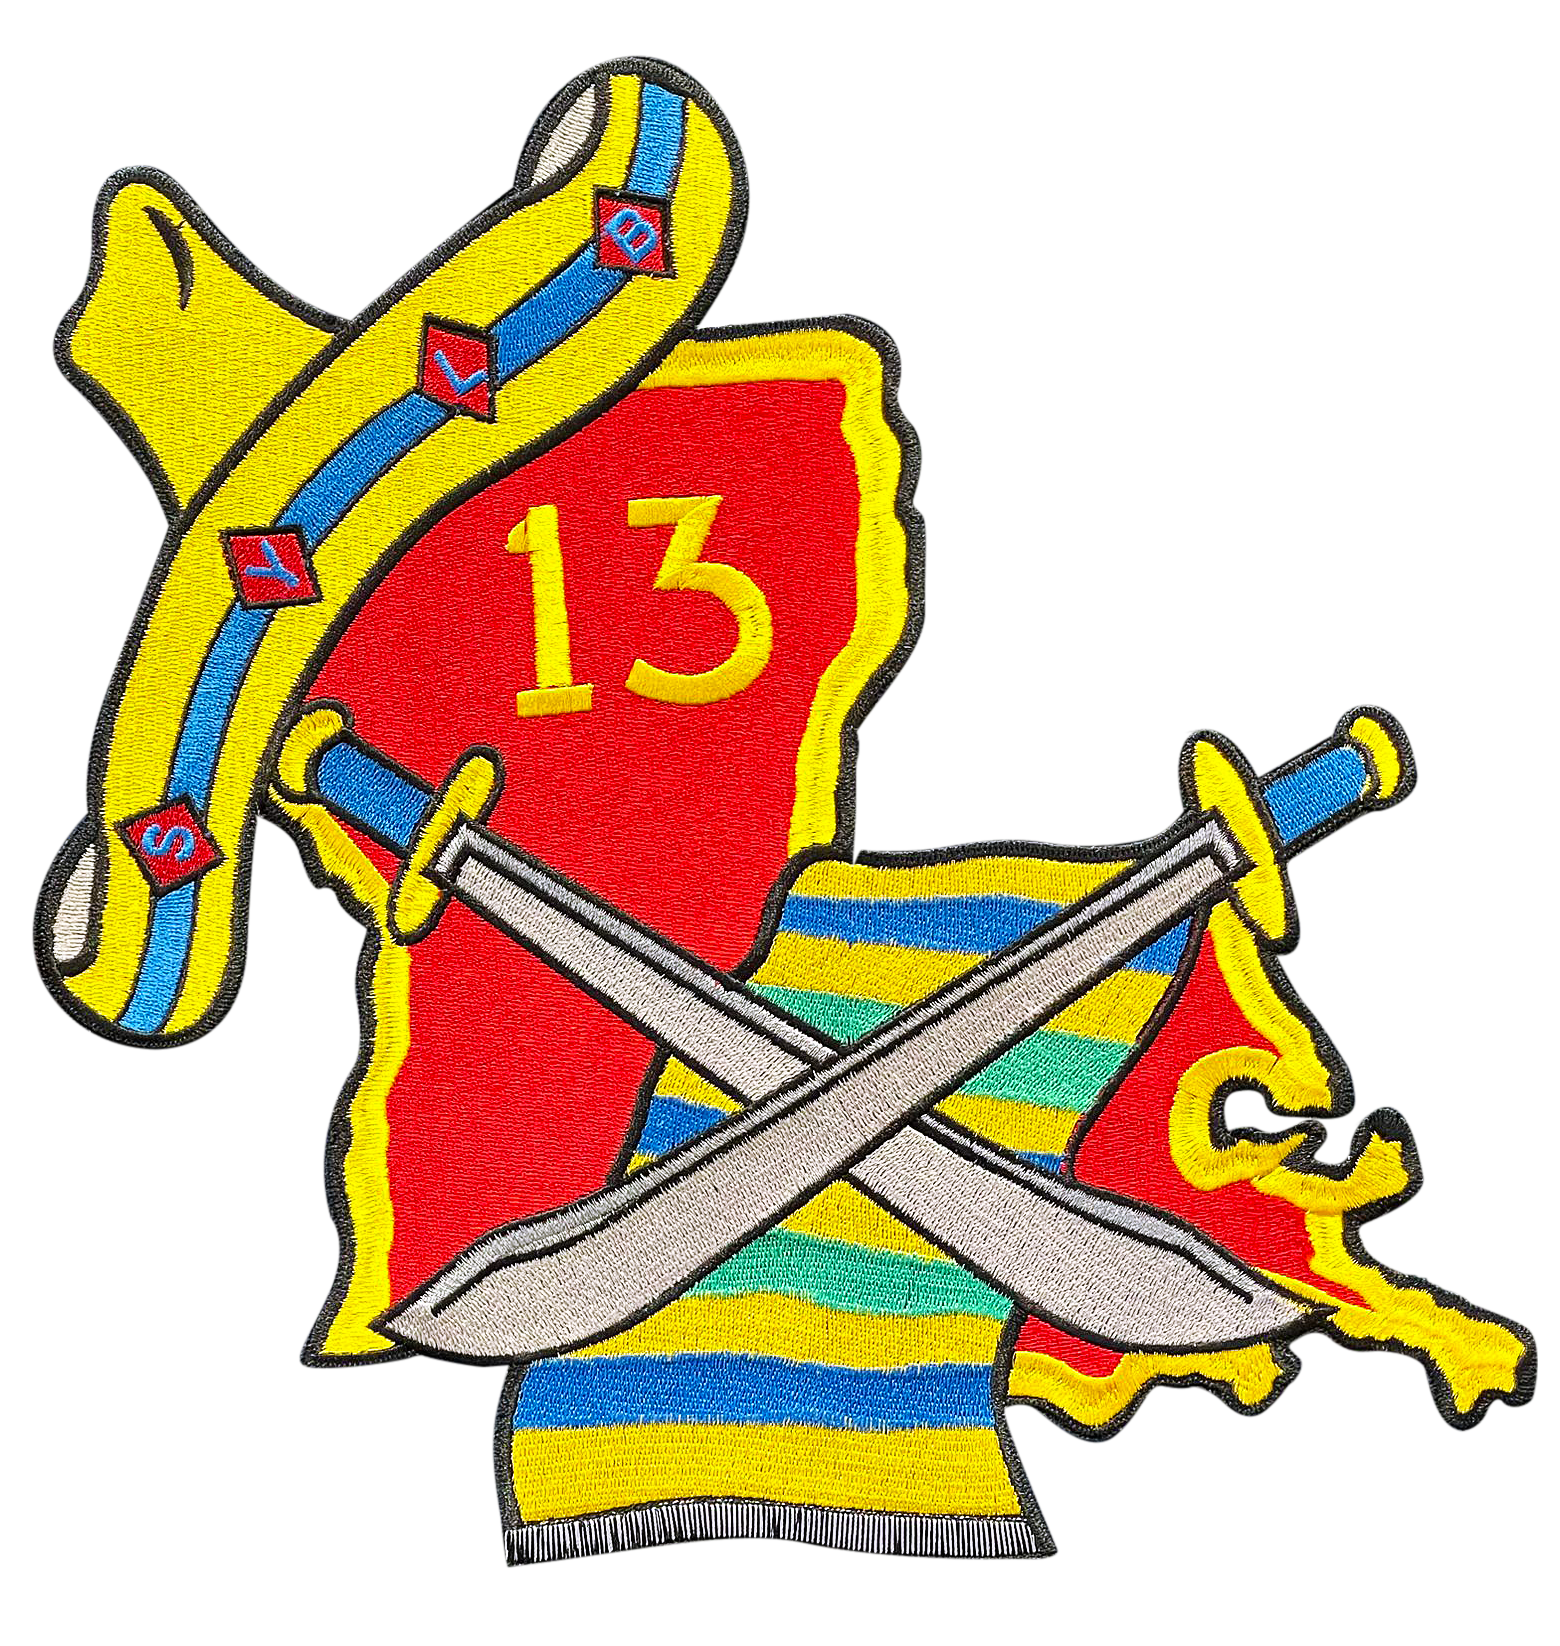 A colorful patch with the number 13 on it